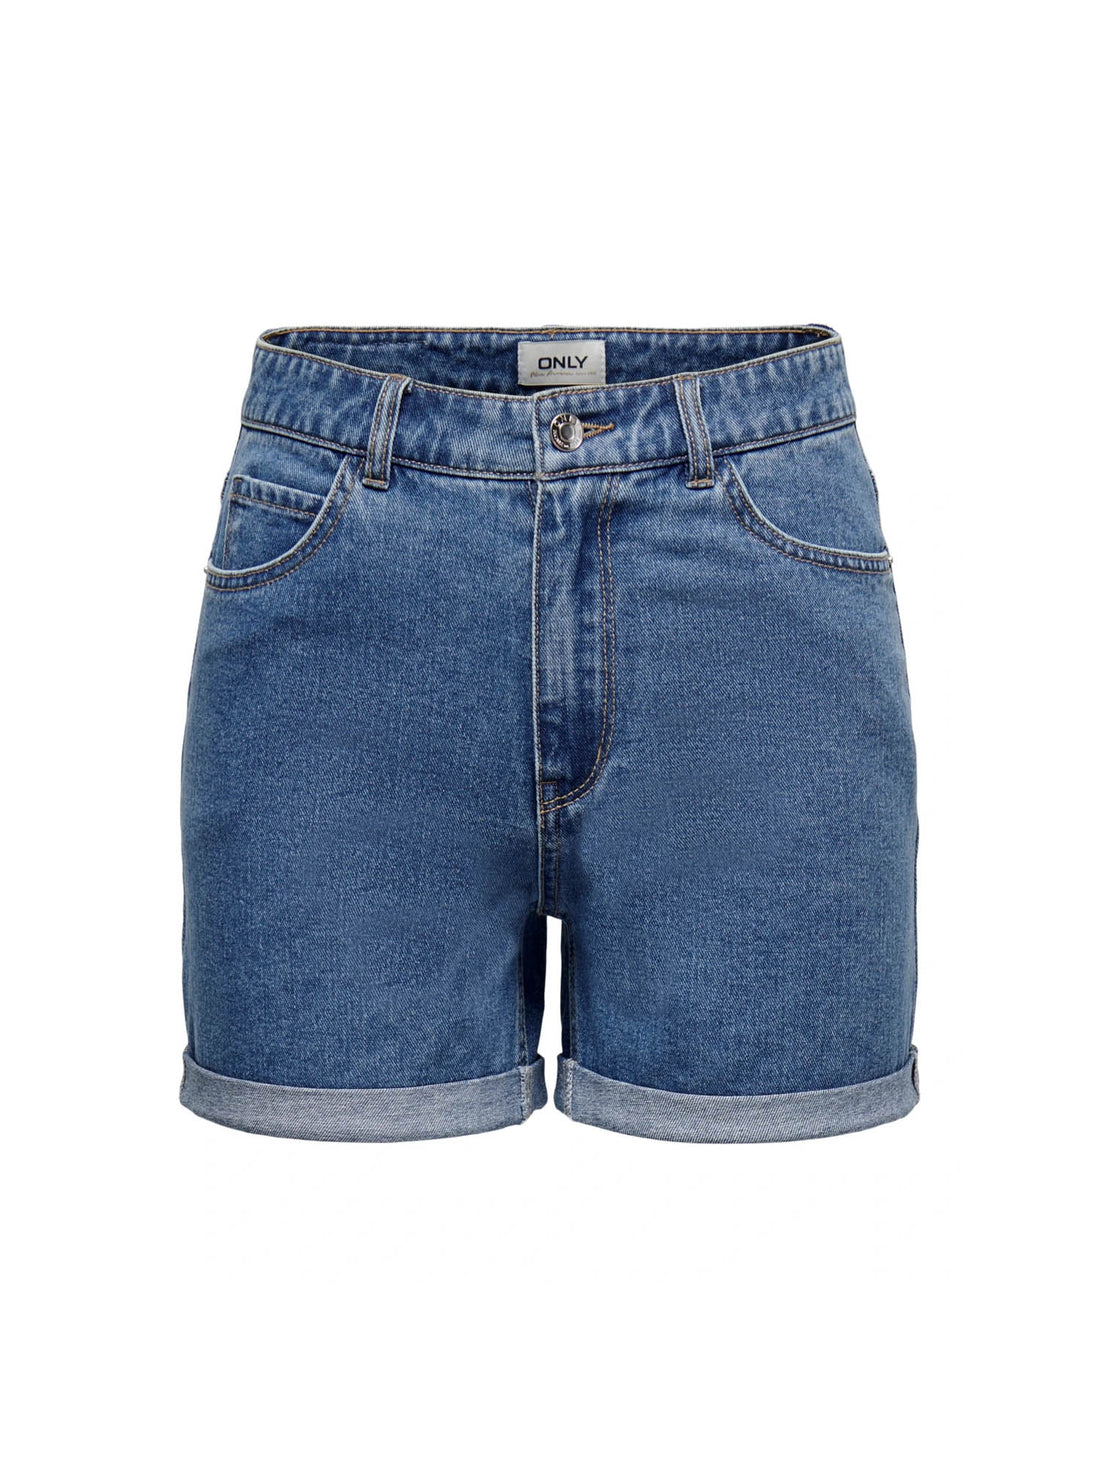 Shorts Blu Scuro Only